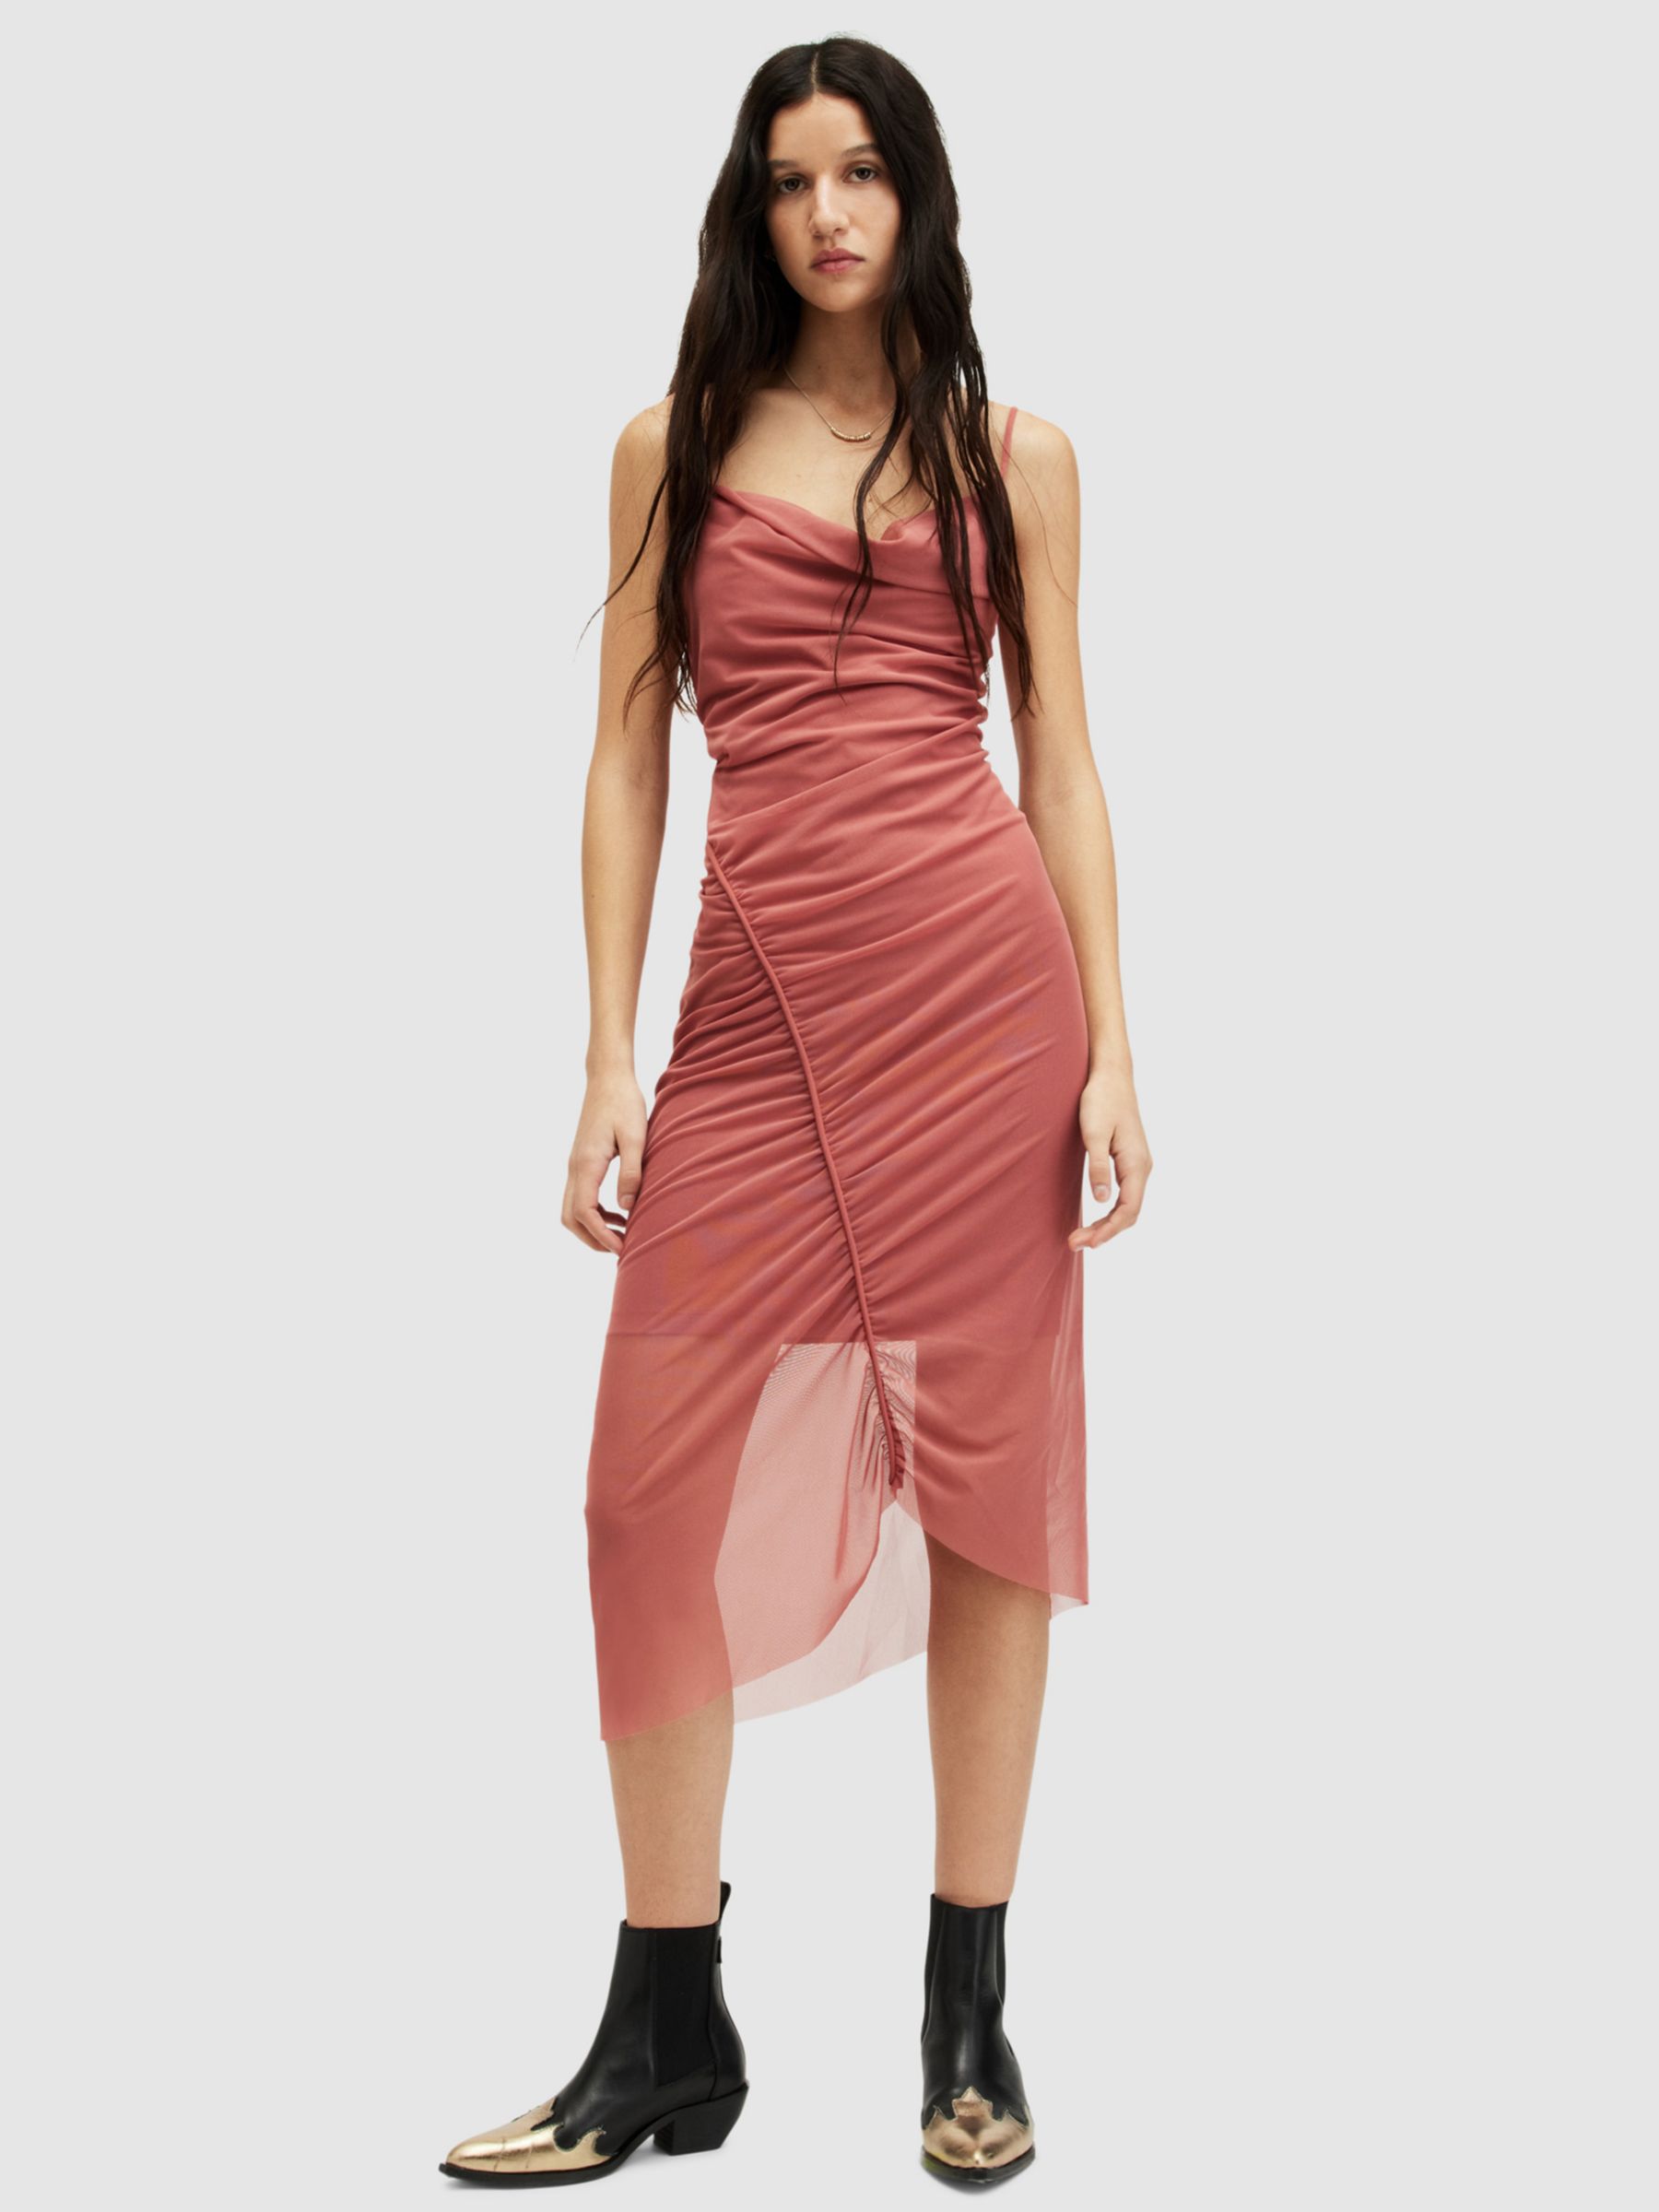 Armoire  Rent this ASOS Closet London Maternity Ribbed Pencil